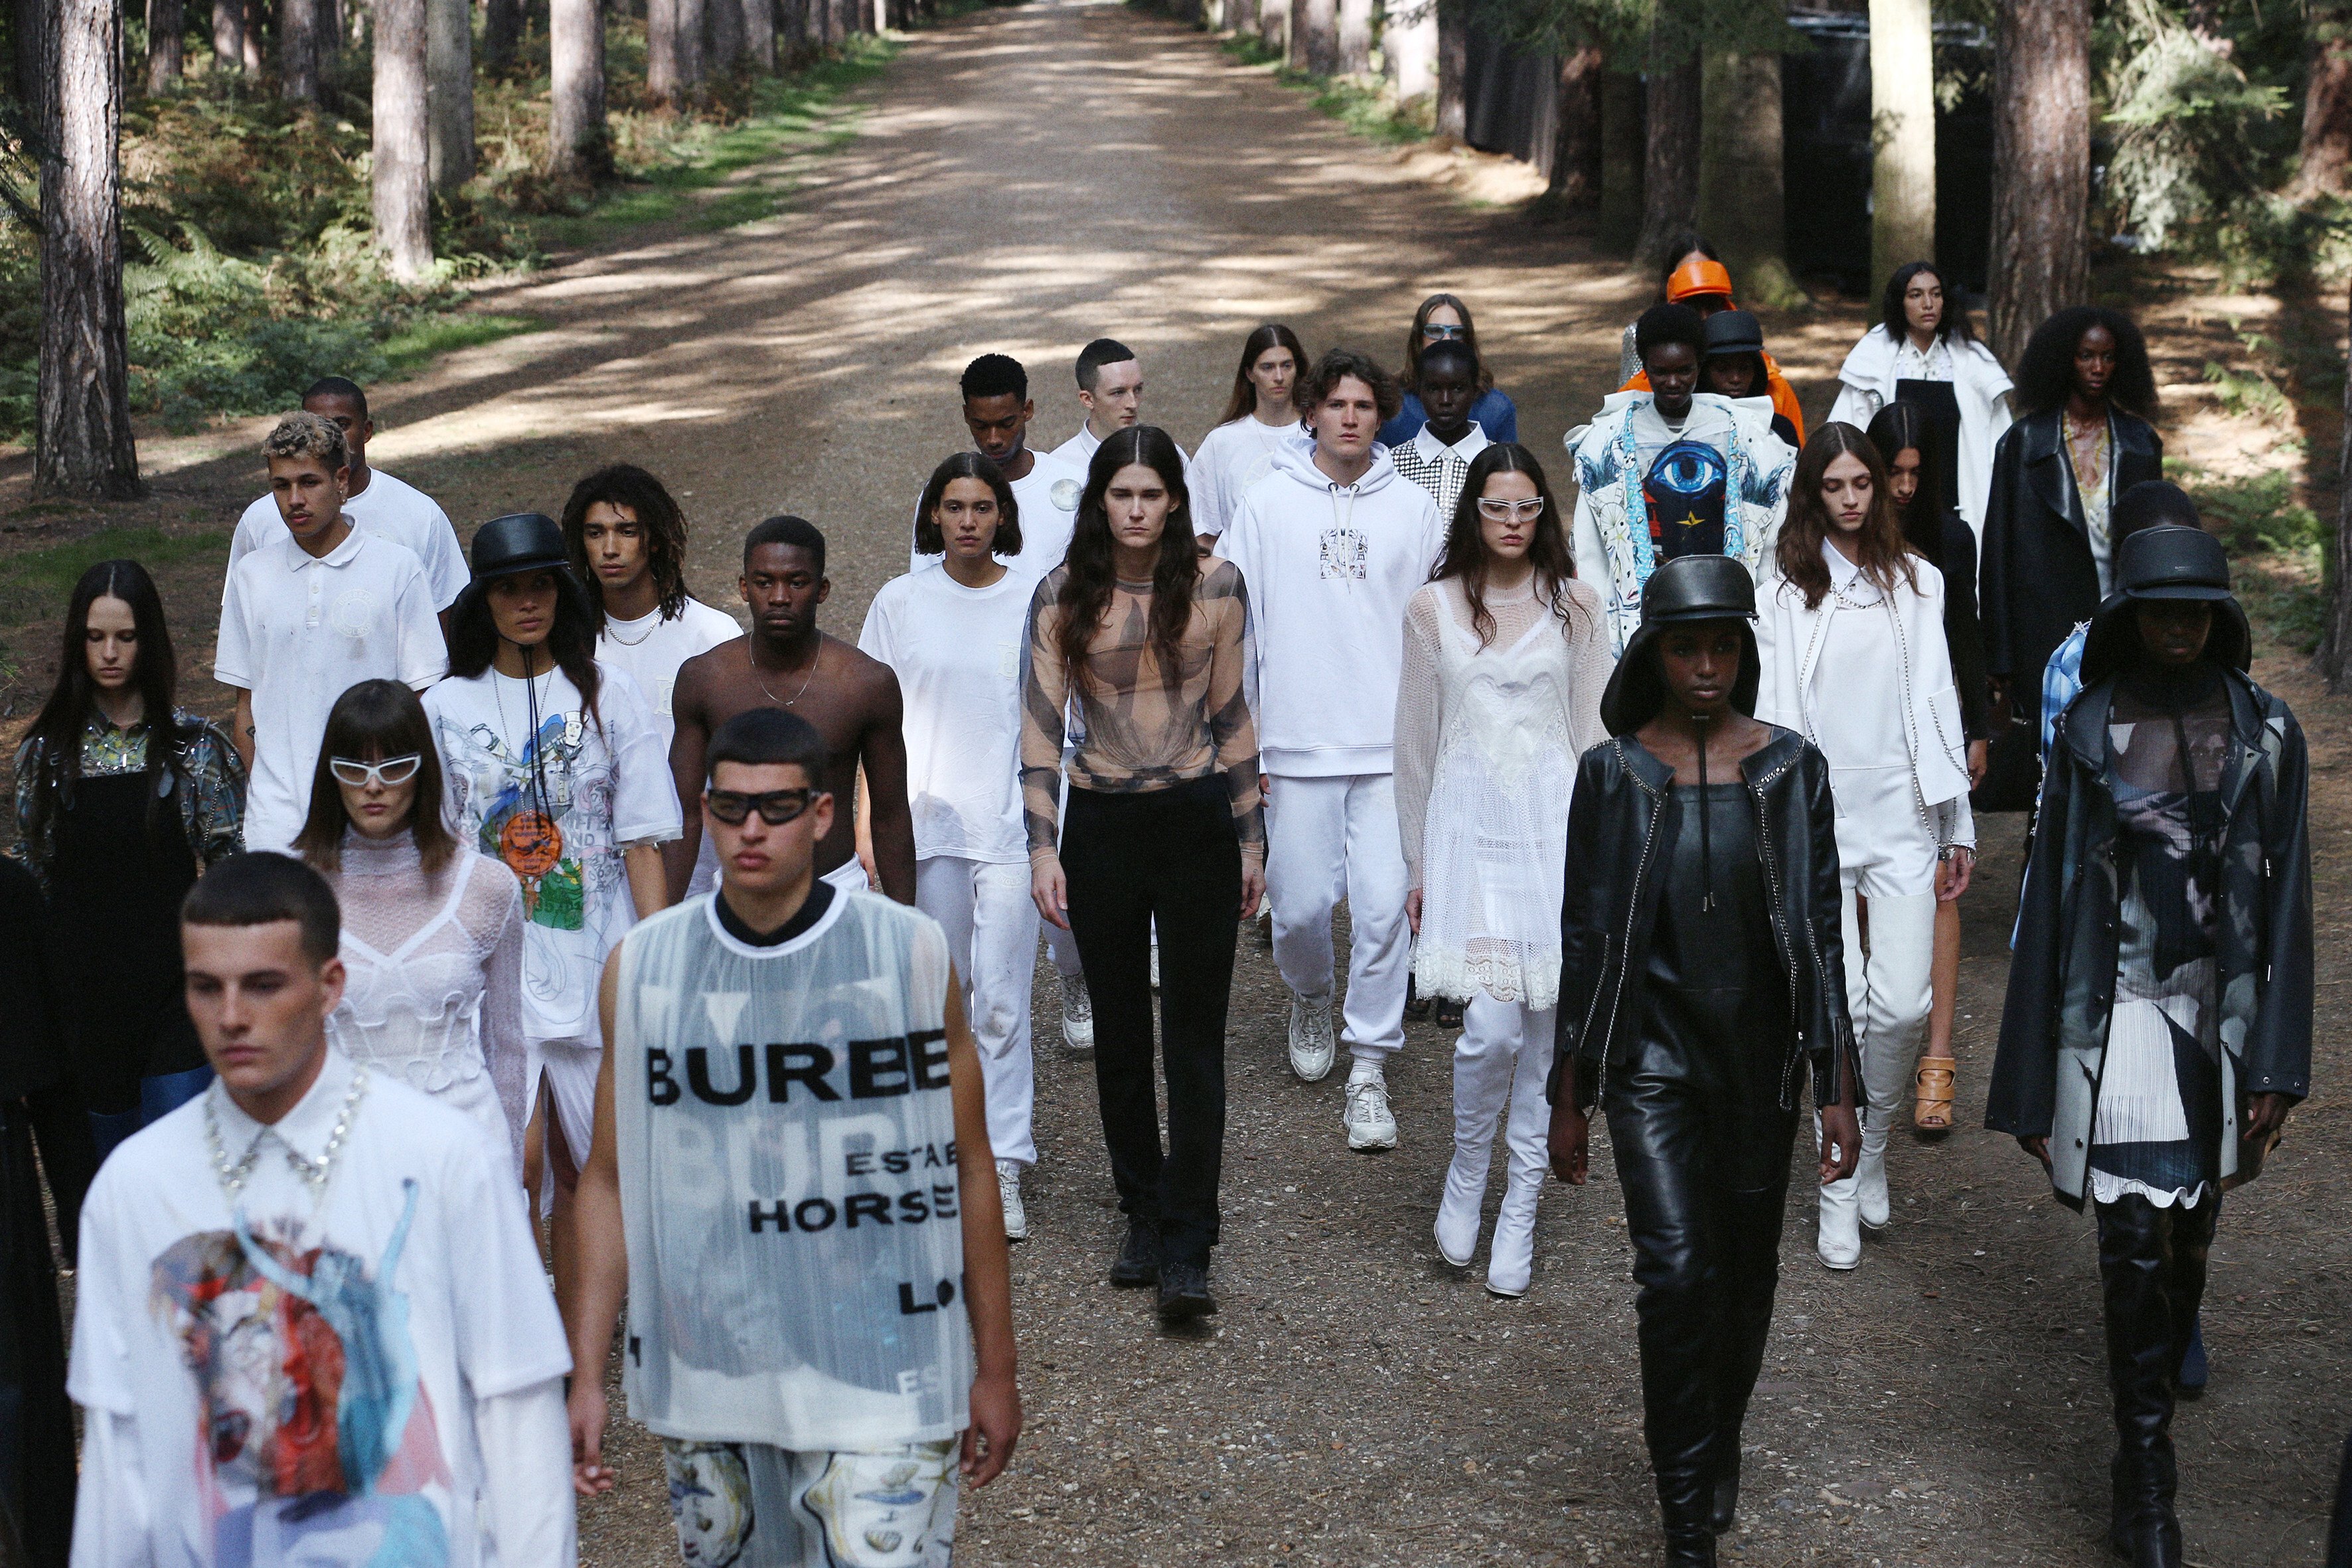 Burberry presented its spring/summer 2021 show outdoors with a theme centred on regeneration and constant evolution – now the brand is forced into its own evolution with news that its CEO, Marco Gobbetti, is moving to Ferragamo. Photo: Burberry